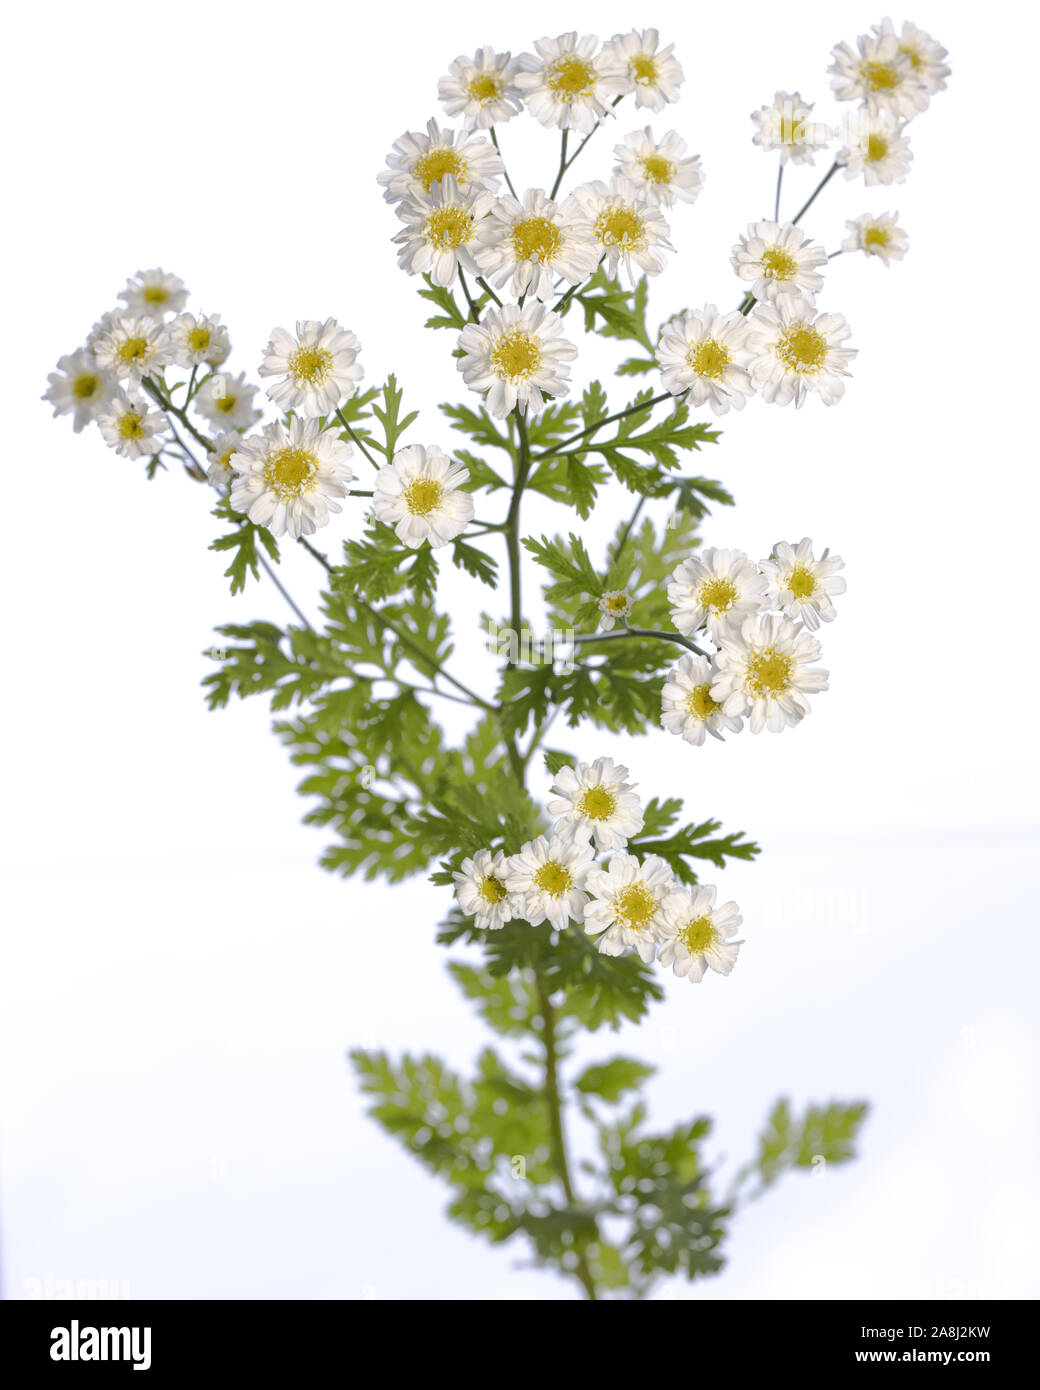 medicinal plant from my garden: Tanacetum parthenium ( feverfew ) flowers and leafs isolated on white background side view Stock Photo